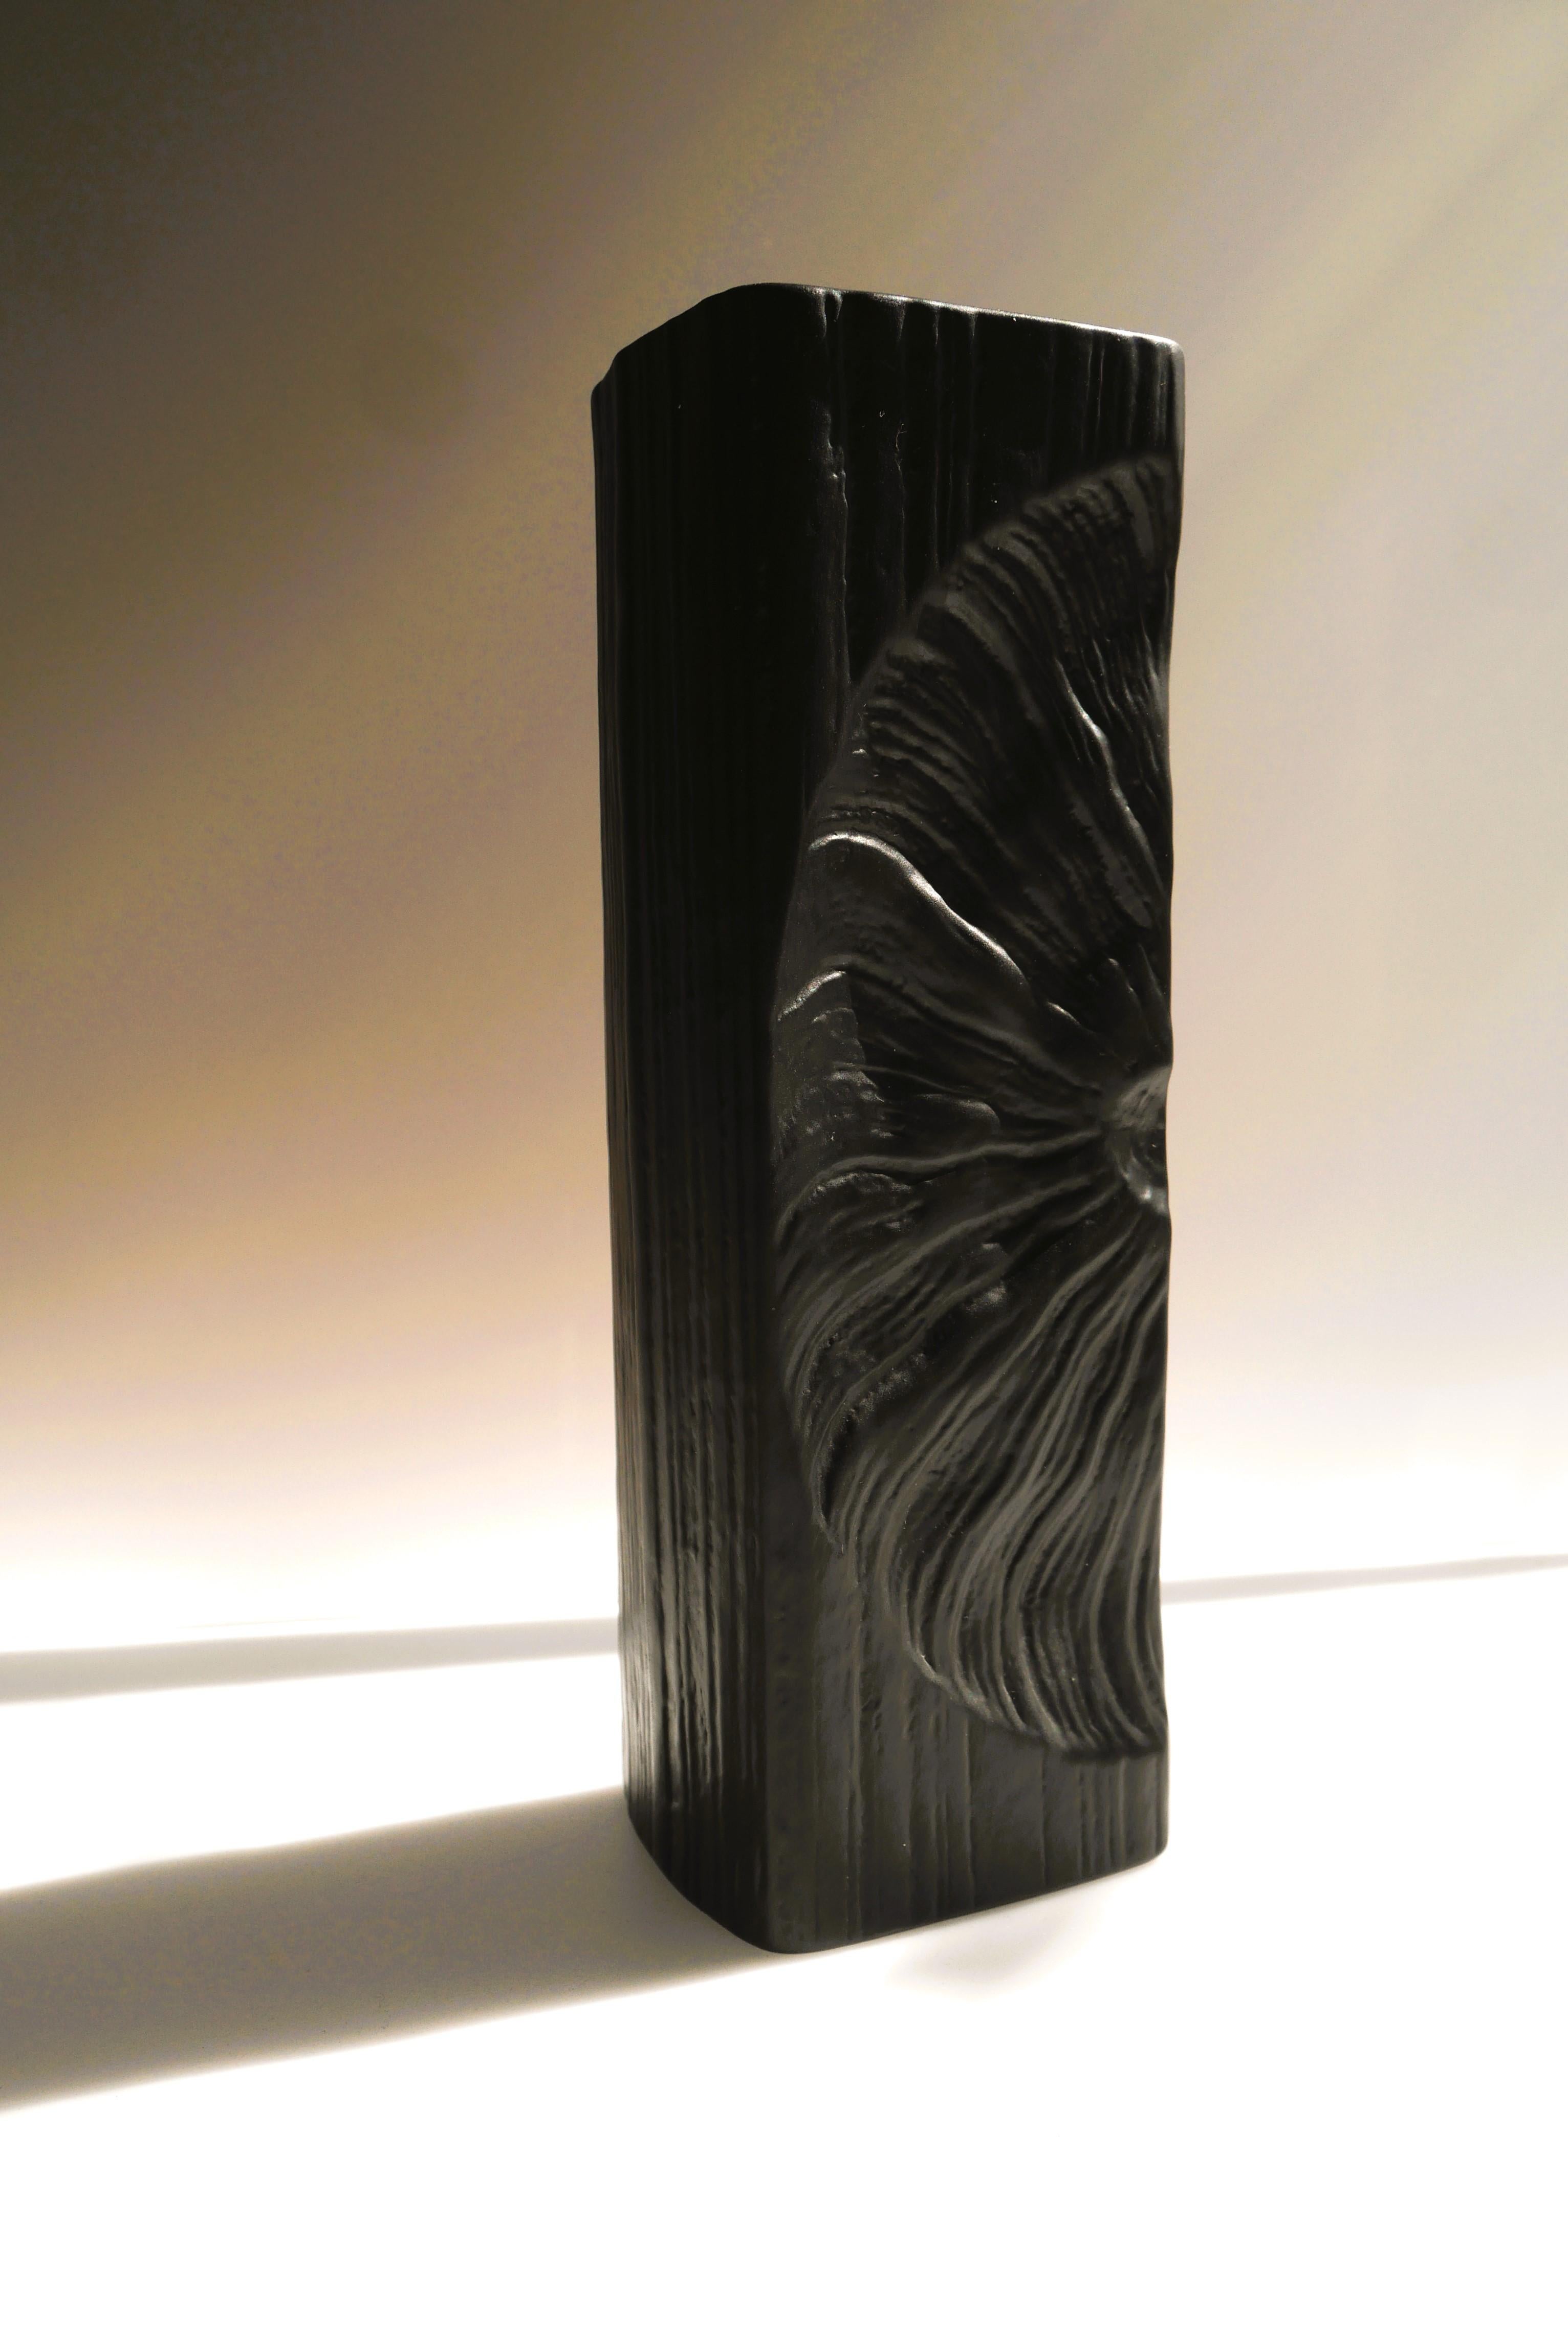 A fantastic Bisque porcelain Op-Art vase from Studio line Rosenthal made by the talented Martin Freyer, Germany. A rather large black ceramic vase with incredible design. The vase is a piece of art. It has imprinted patterns which resemble a fossil.